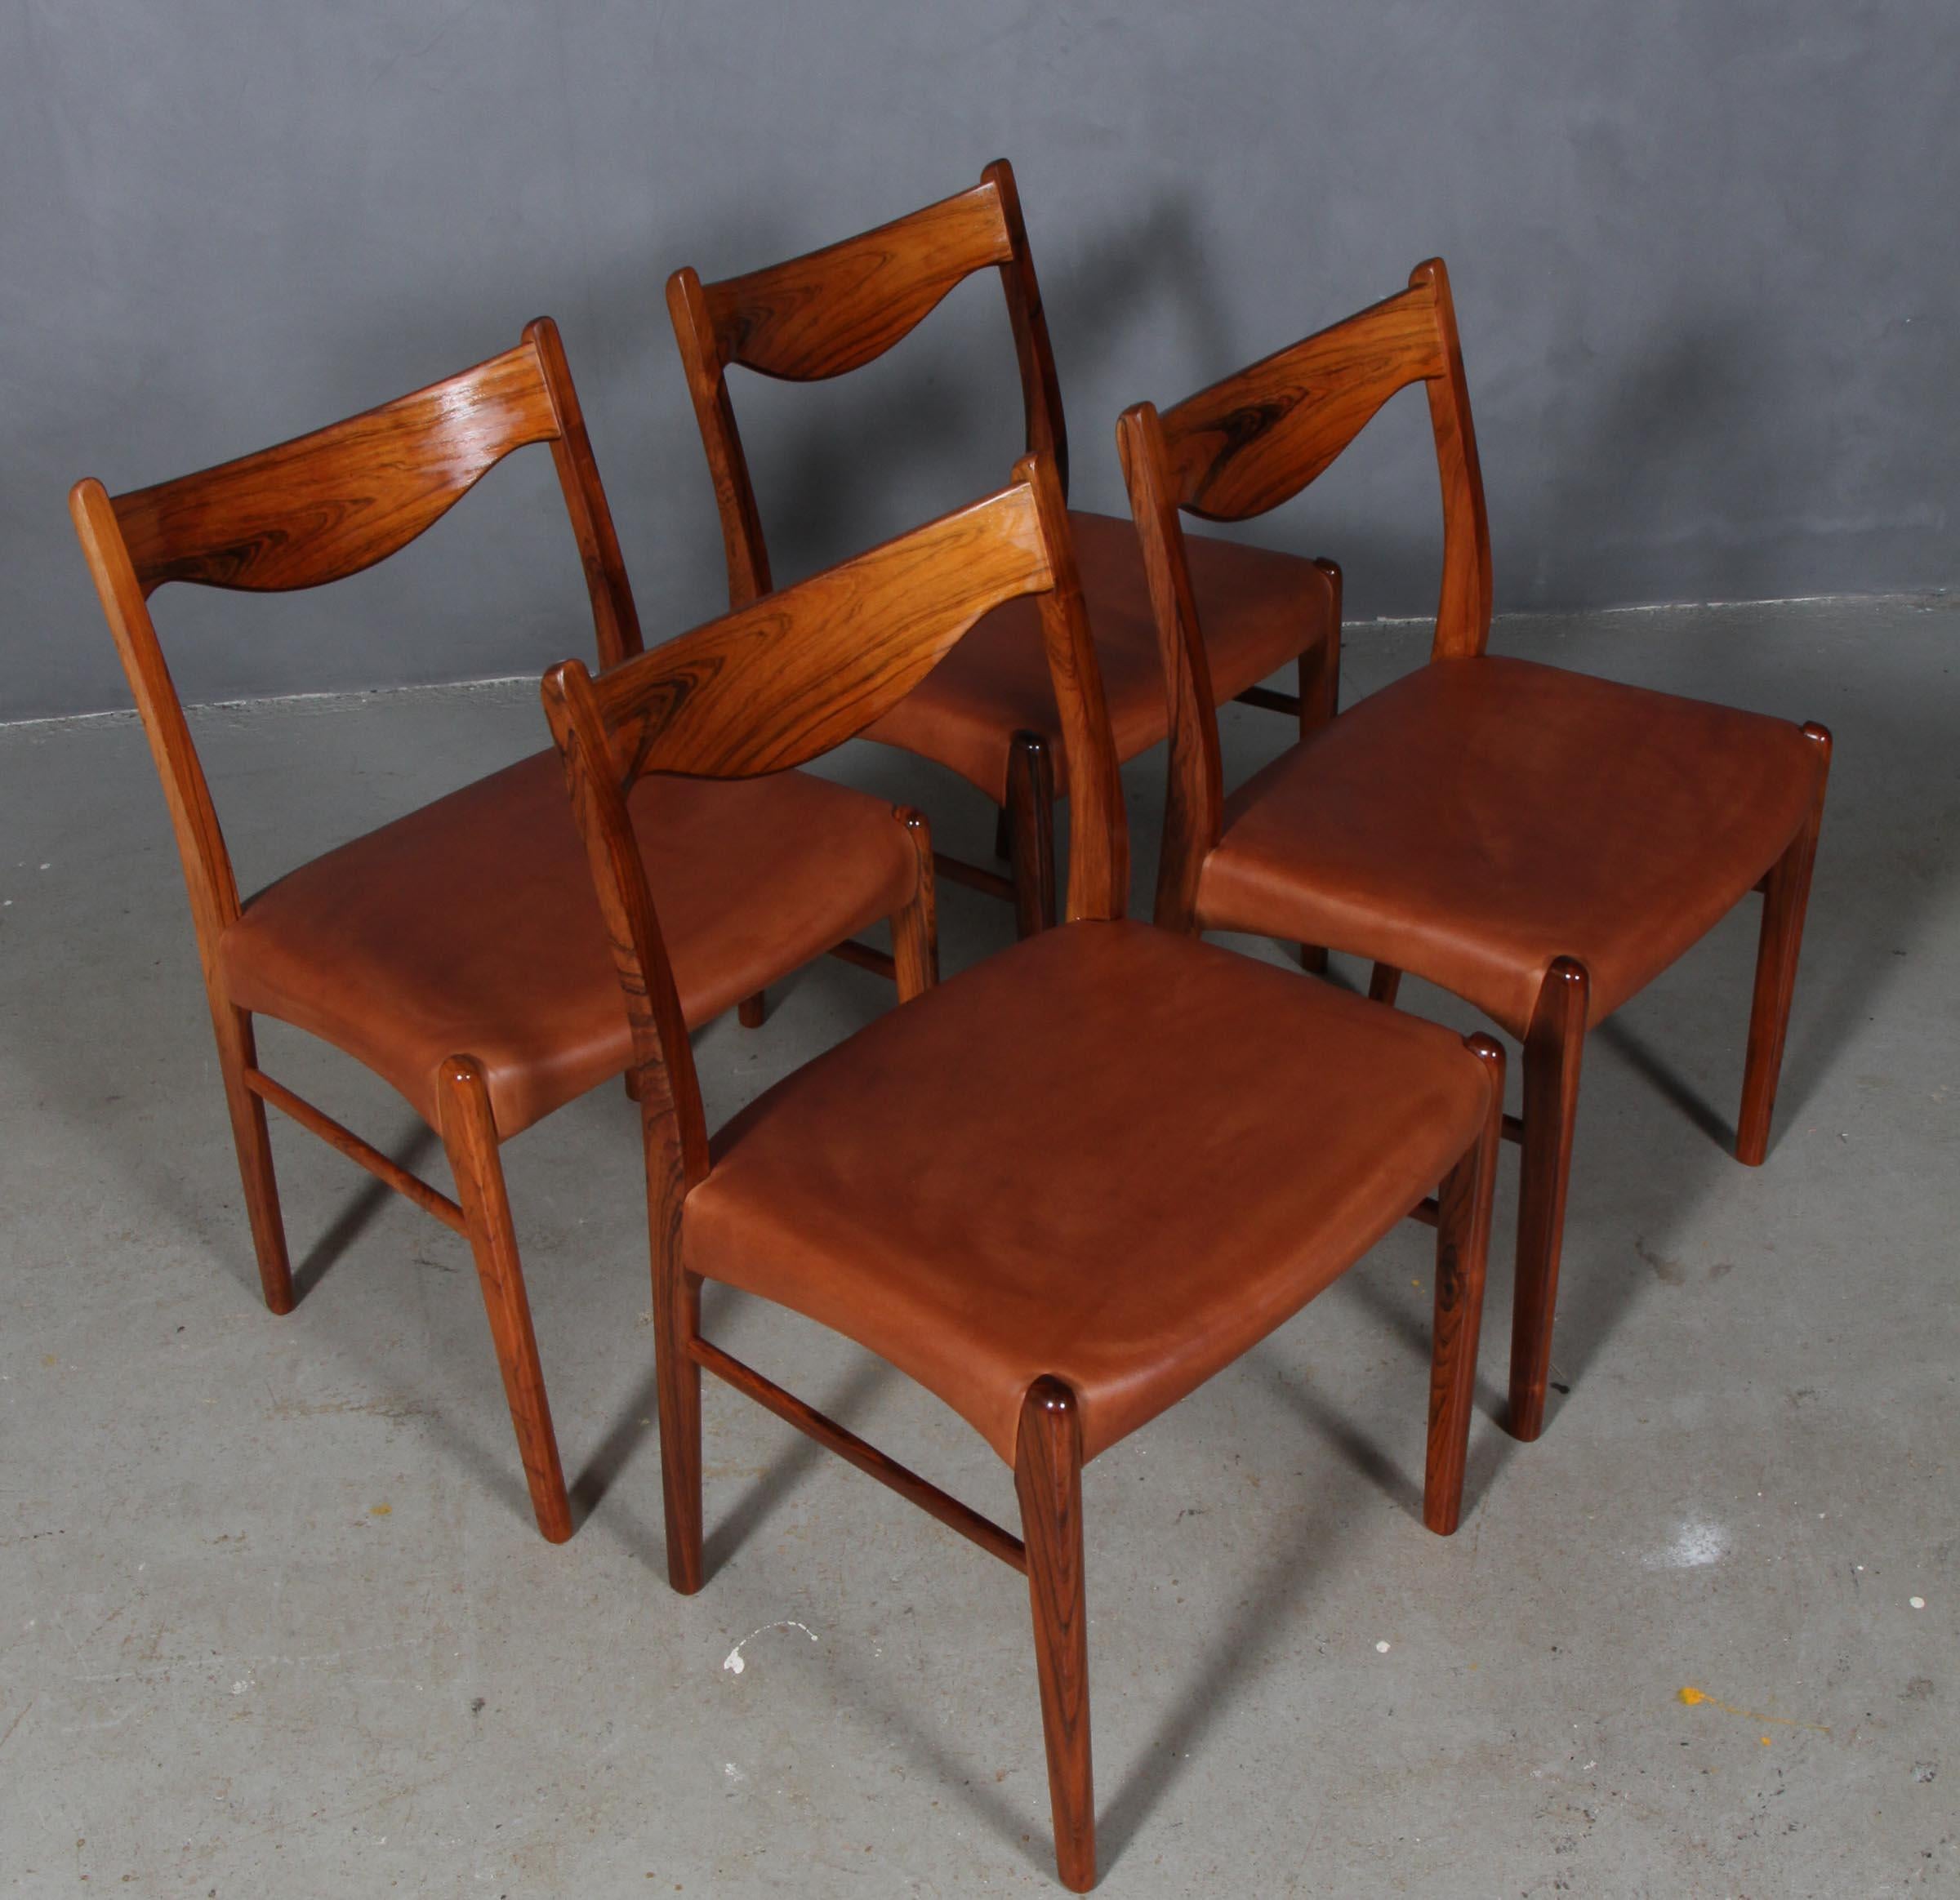 Four dining chairs designed by Arne Wahl, model GS61 for Glyngore Stolefabrik. 

Chairs crafted of solid rosewood with new upholstered seats in tan aniline leather.